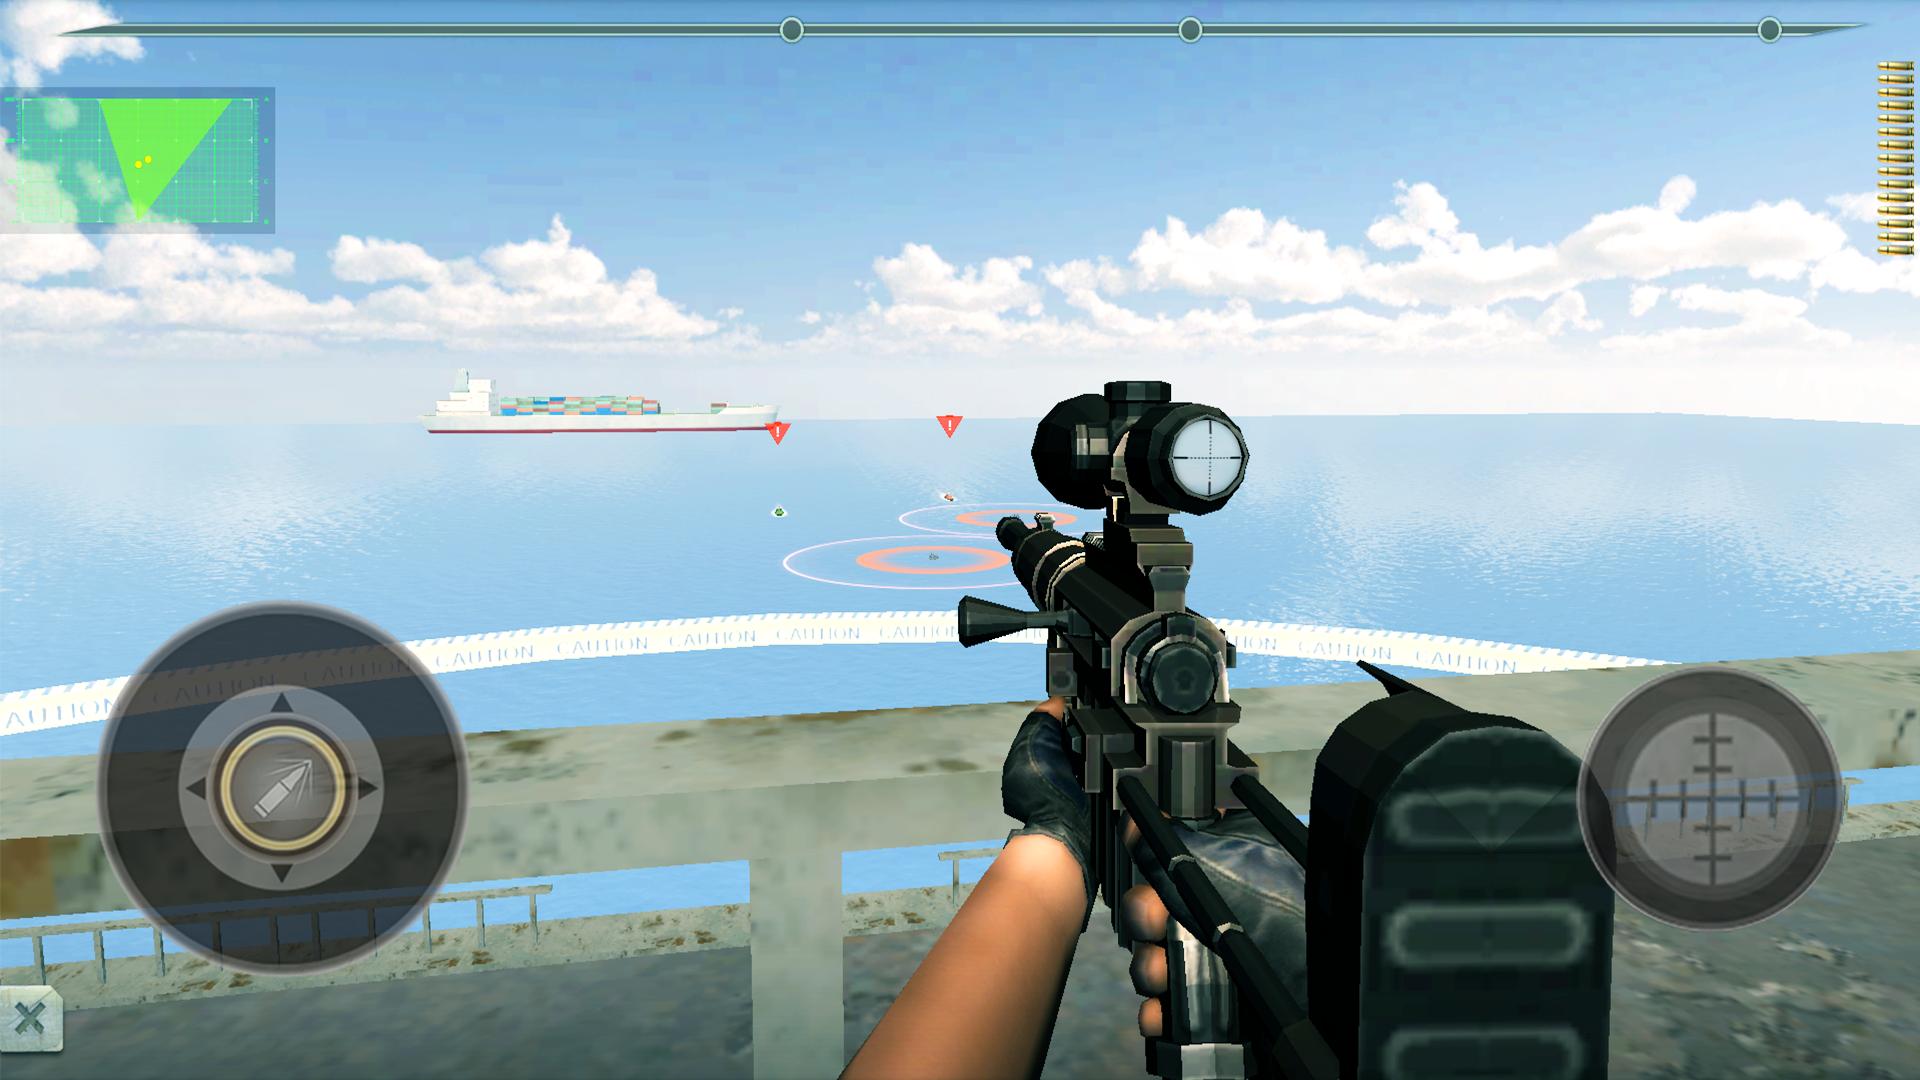 Defense Ops on the Ocean: Fighting Pirates 2.1 Screenshot 6